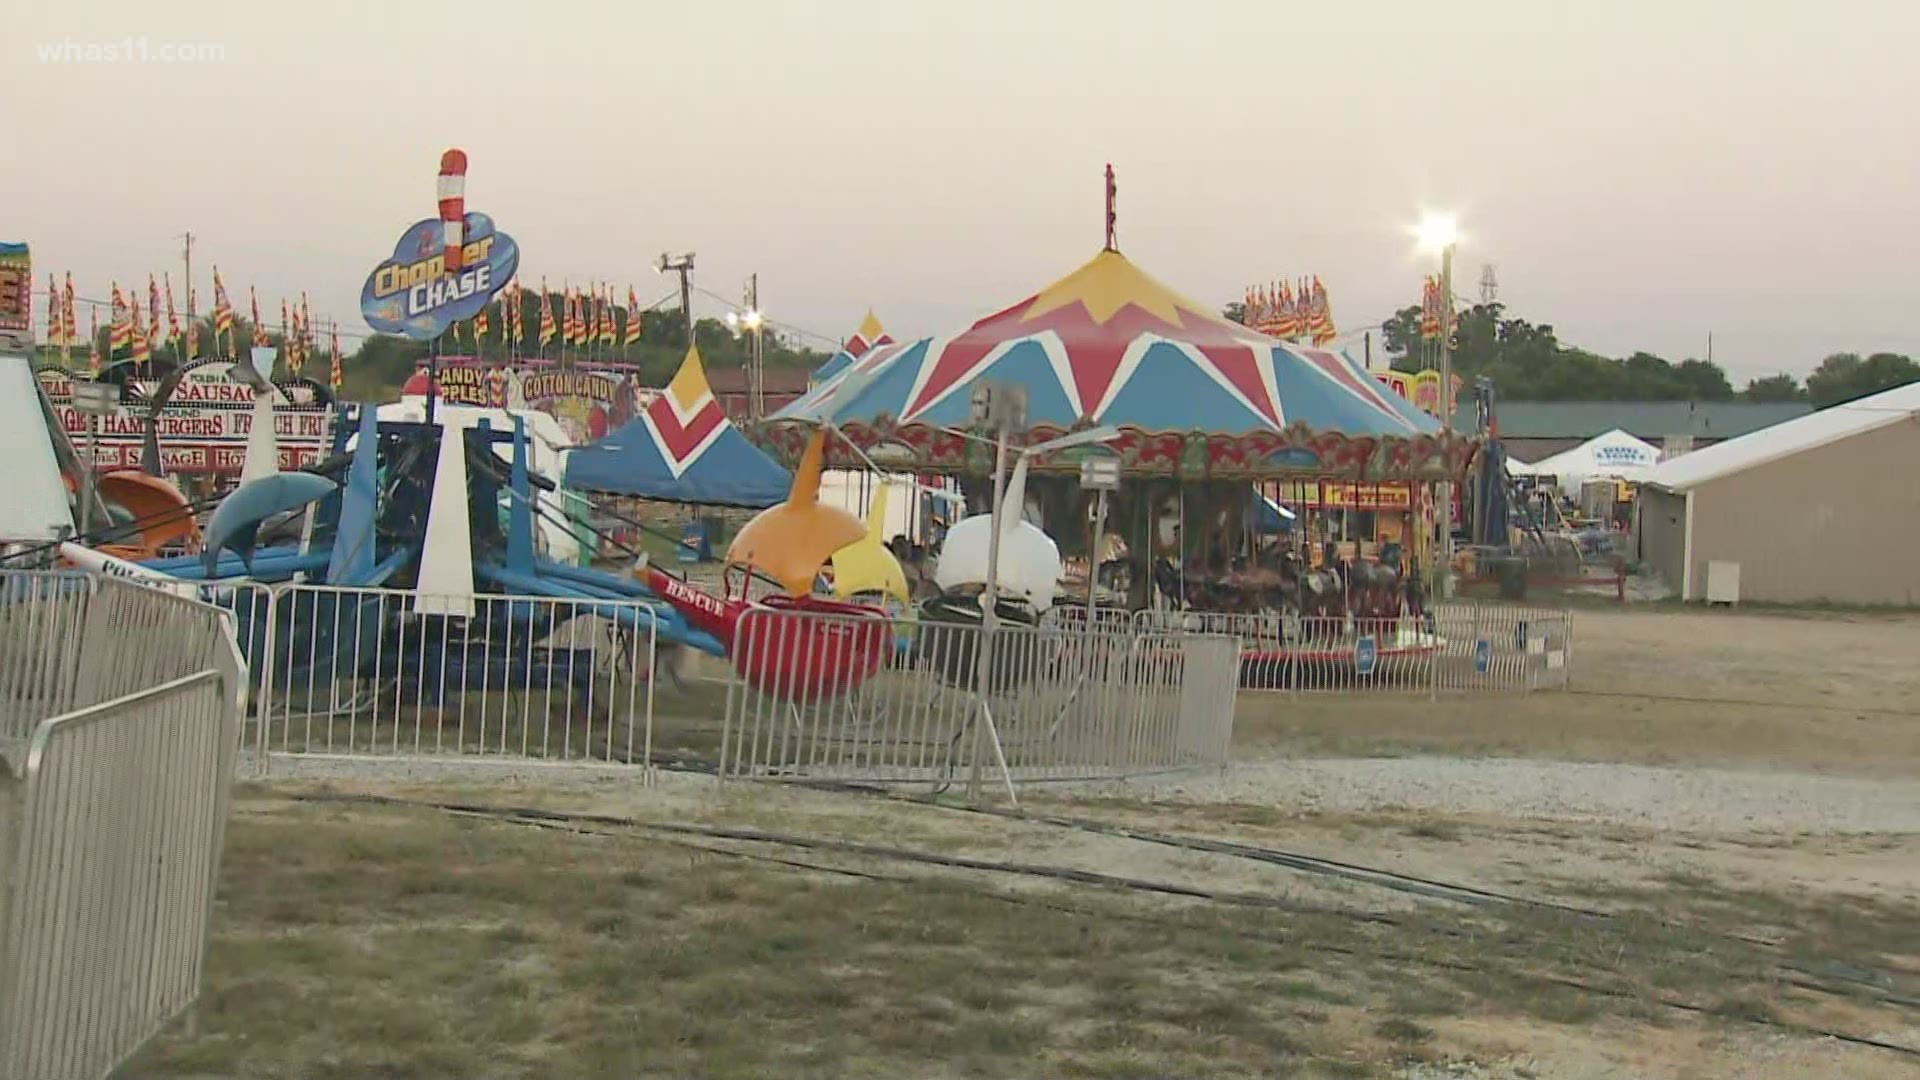 The Oldham County Fair returns to LaGrange this week and there are plenty fun events to attend.